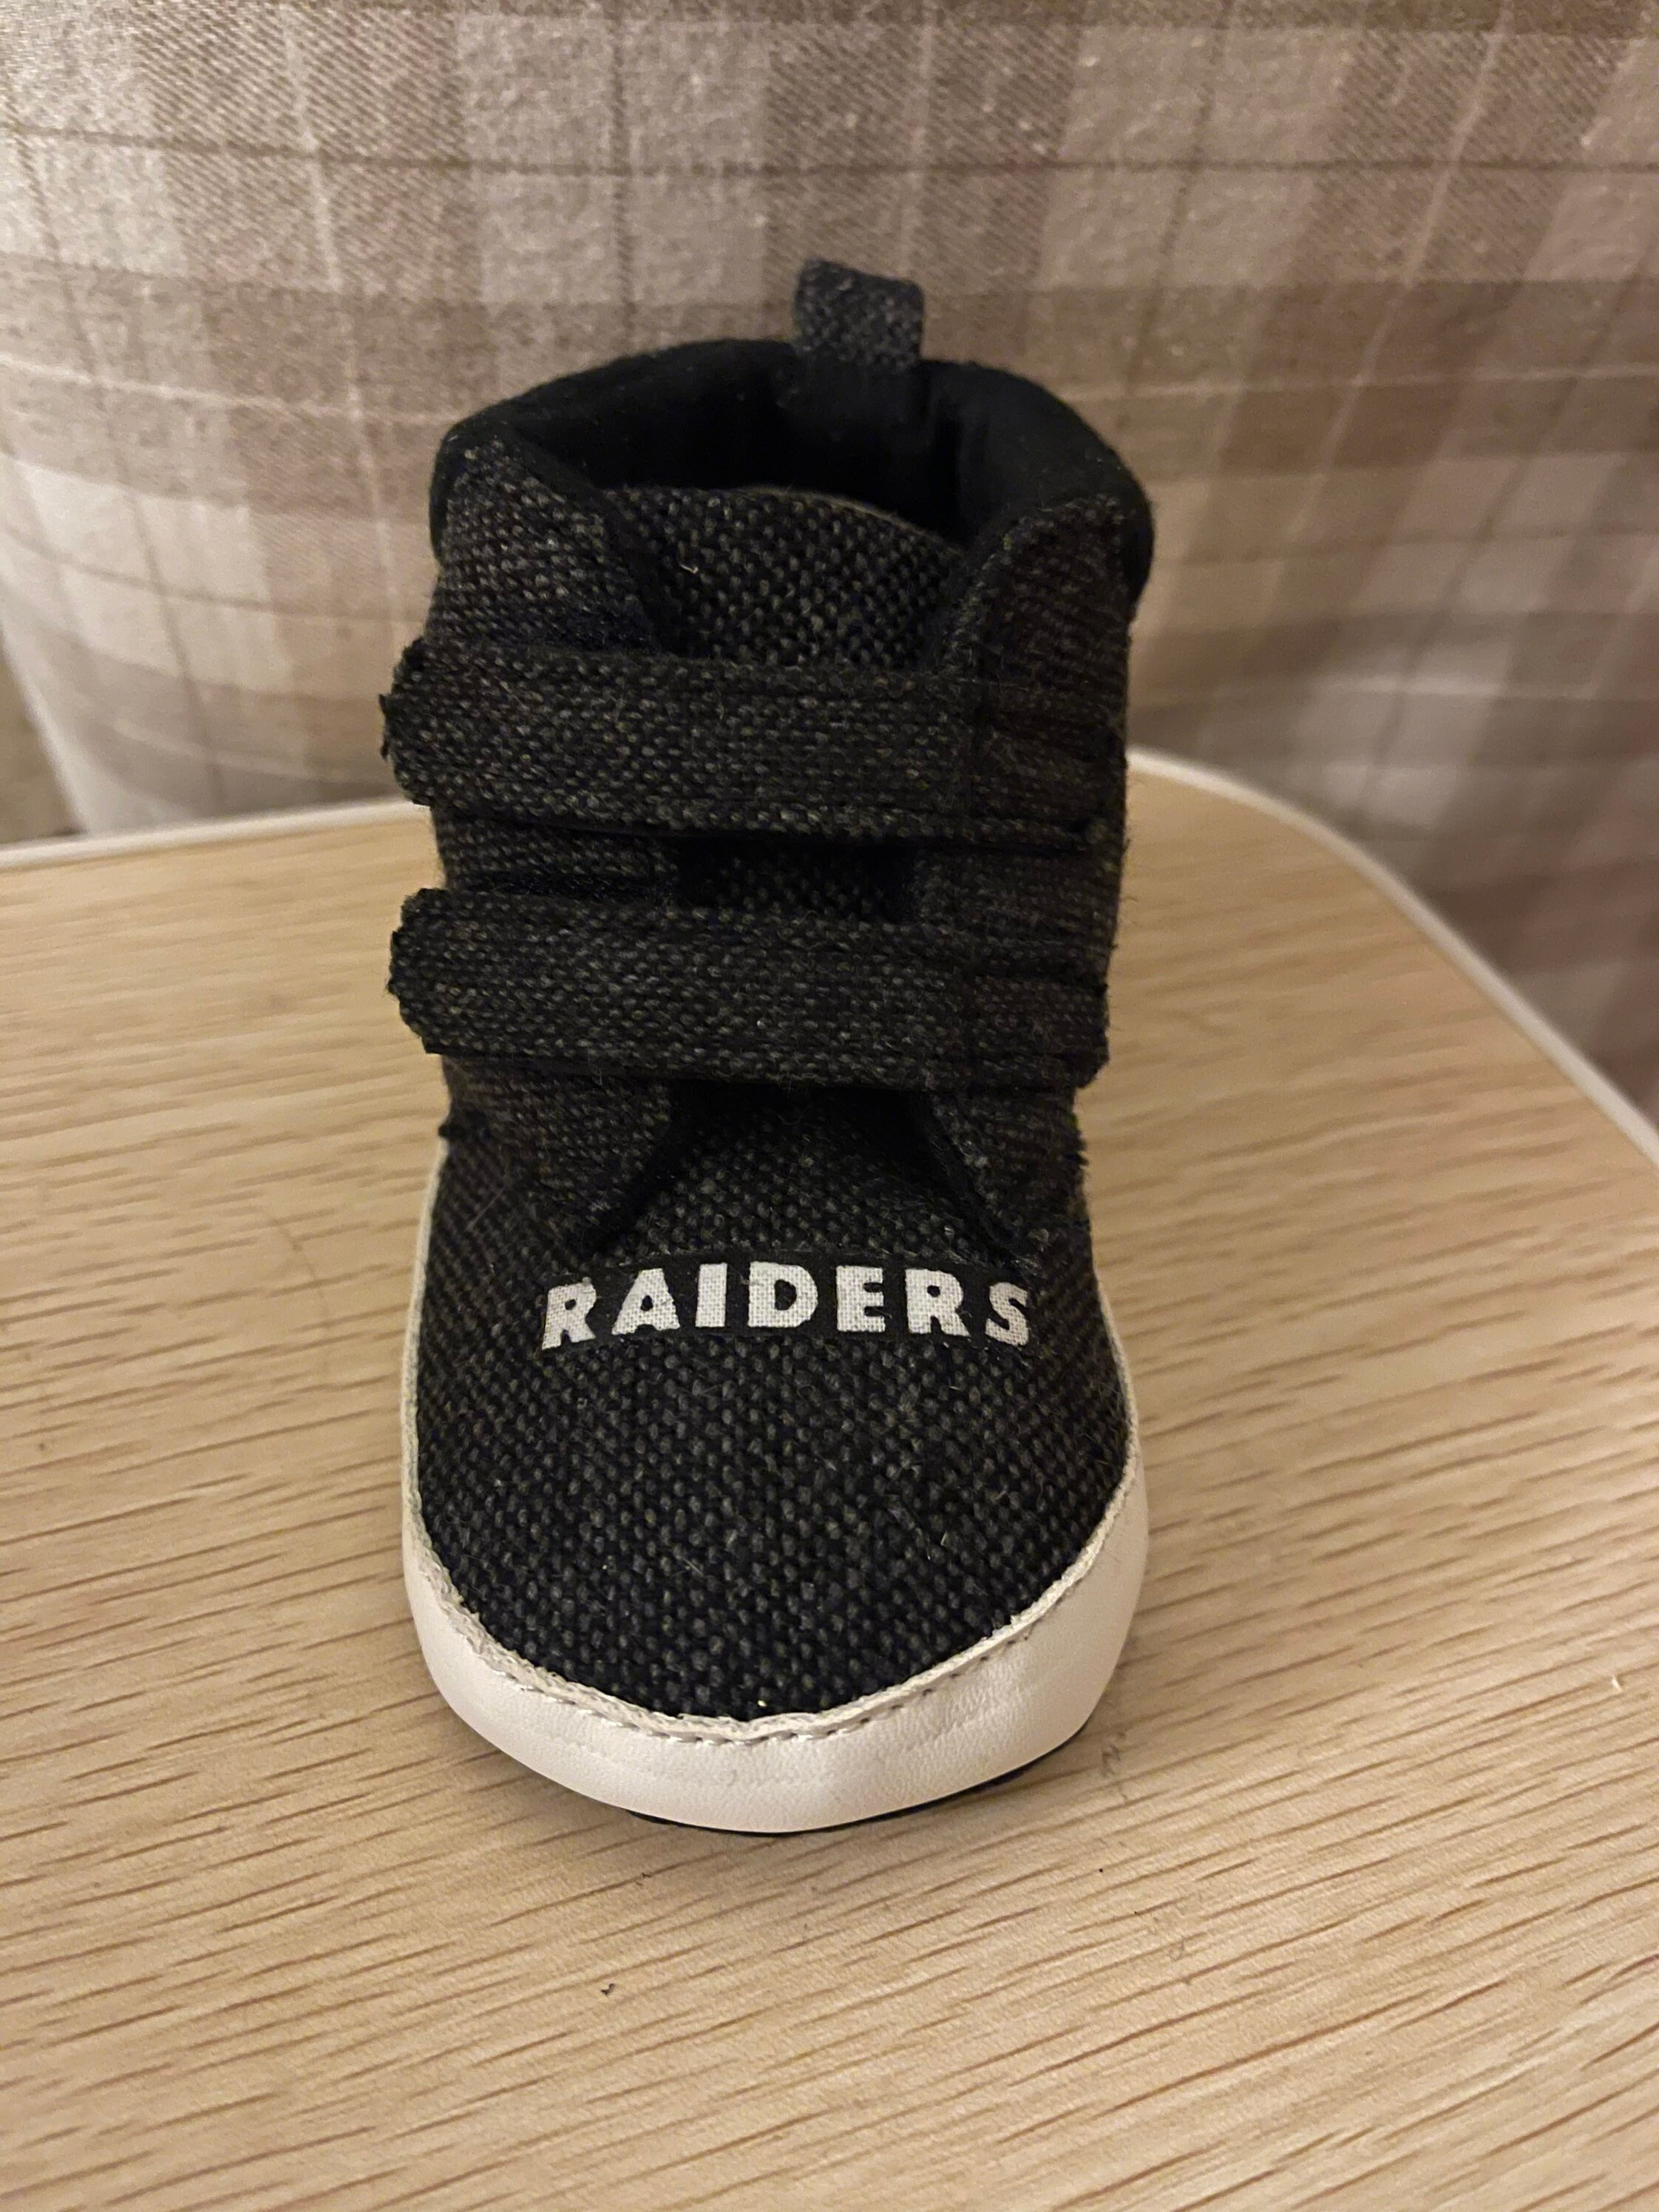 Loley Pops Limited Edition Raiders Baby Shoes 9/12 Months - Etsy